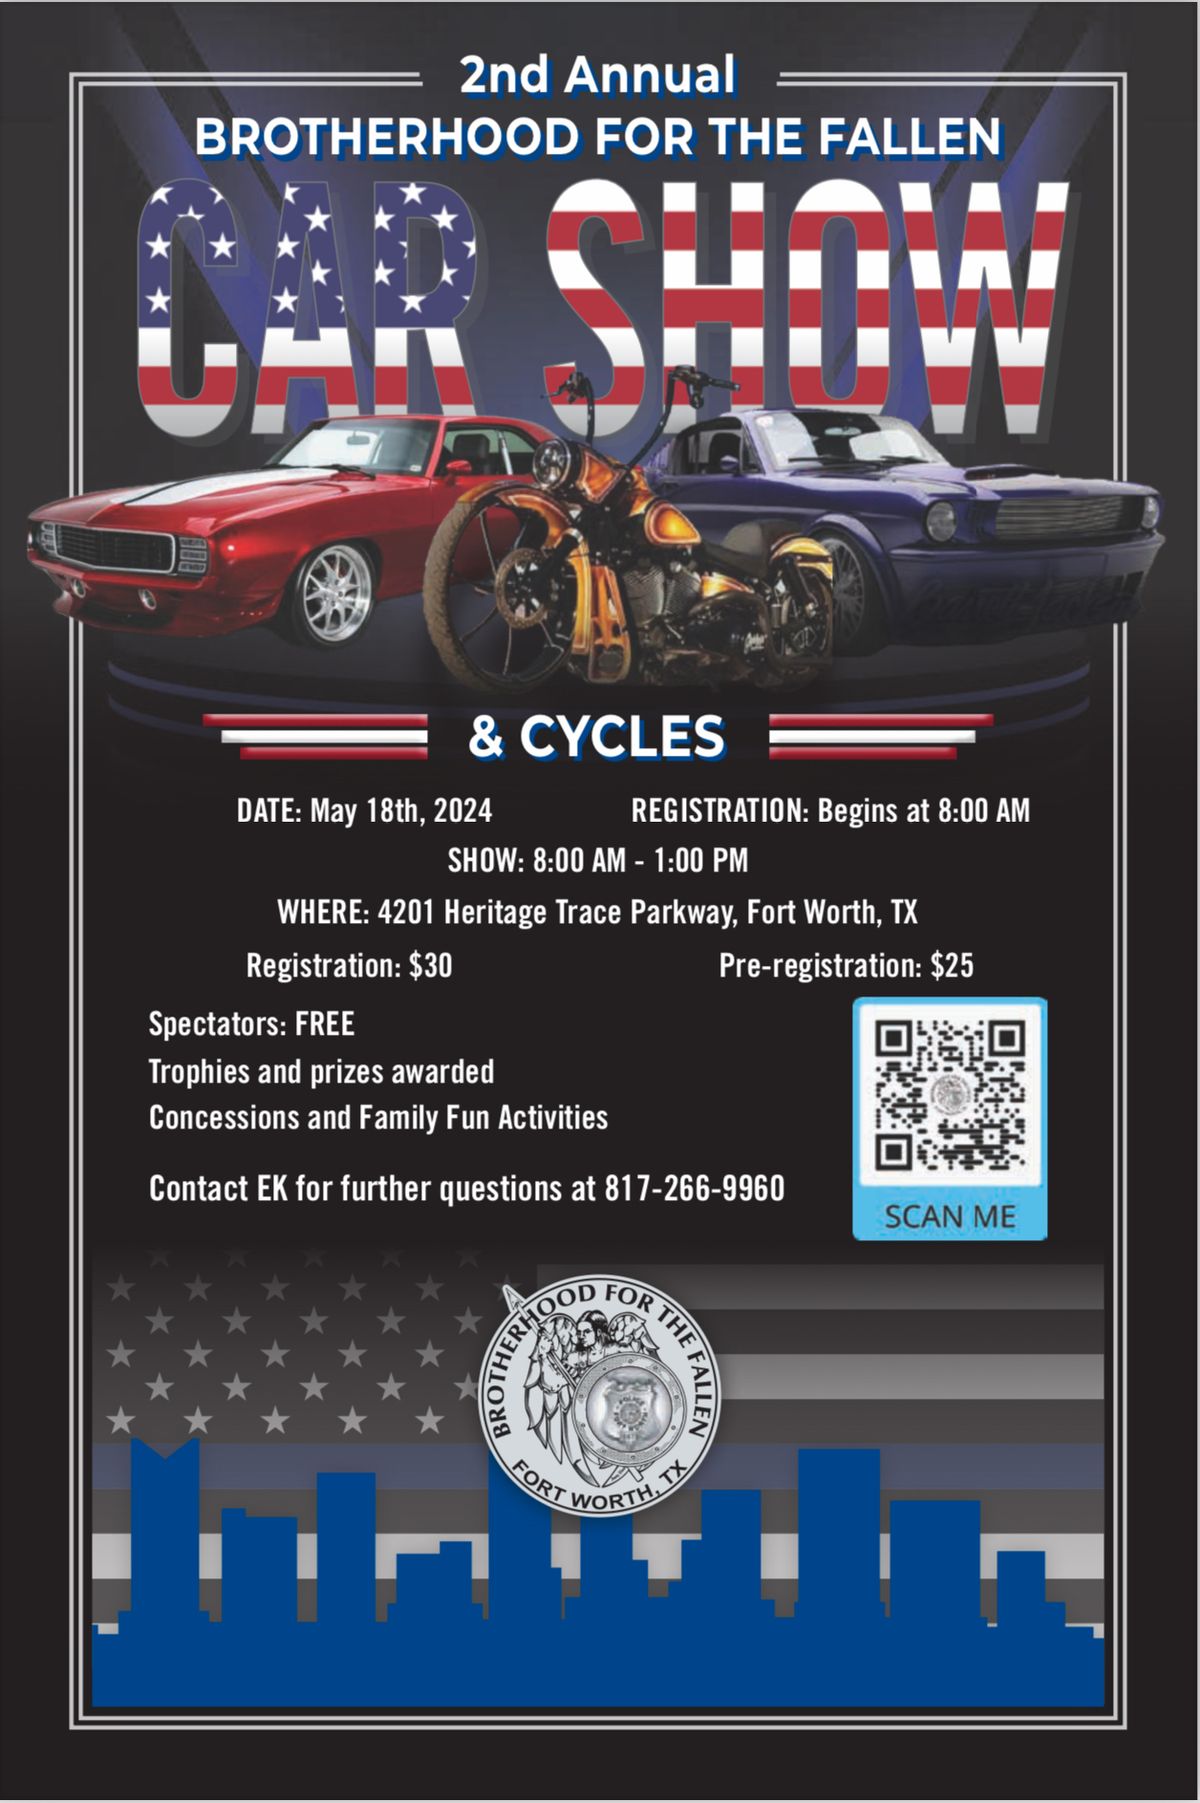 2nd Annual Brotherhood for the Fallen Memorial Car Show